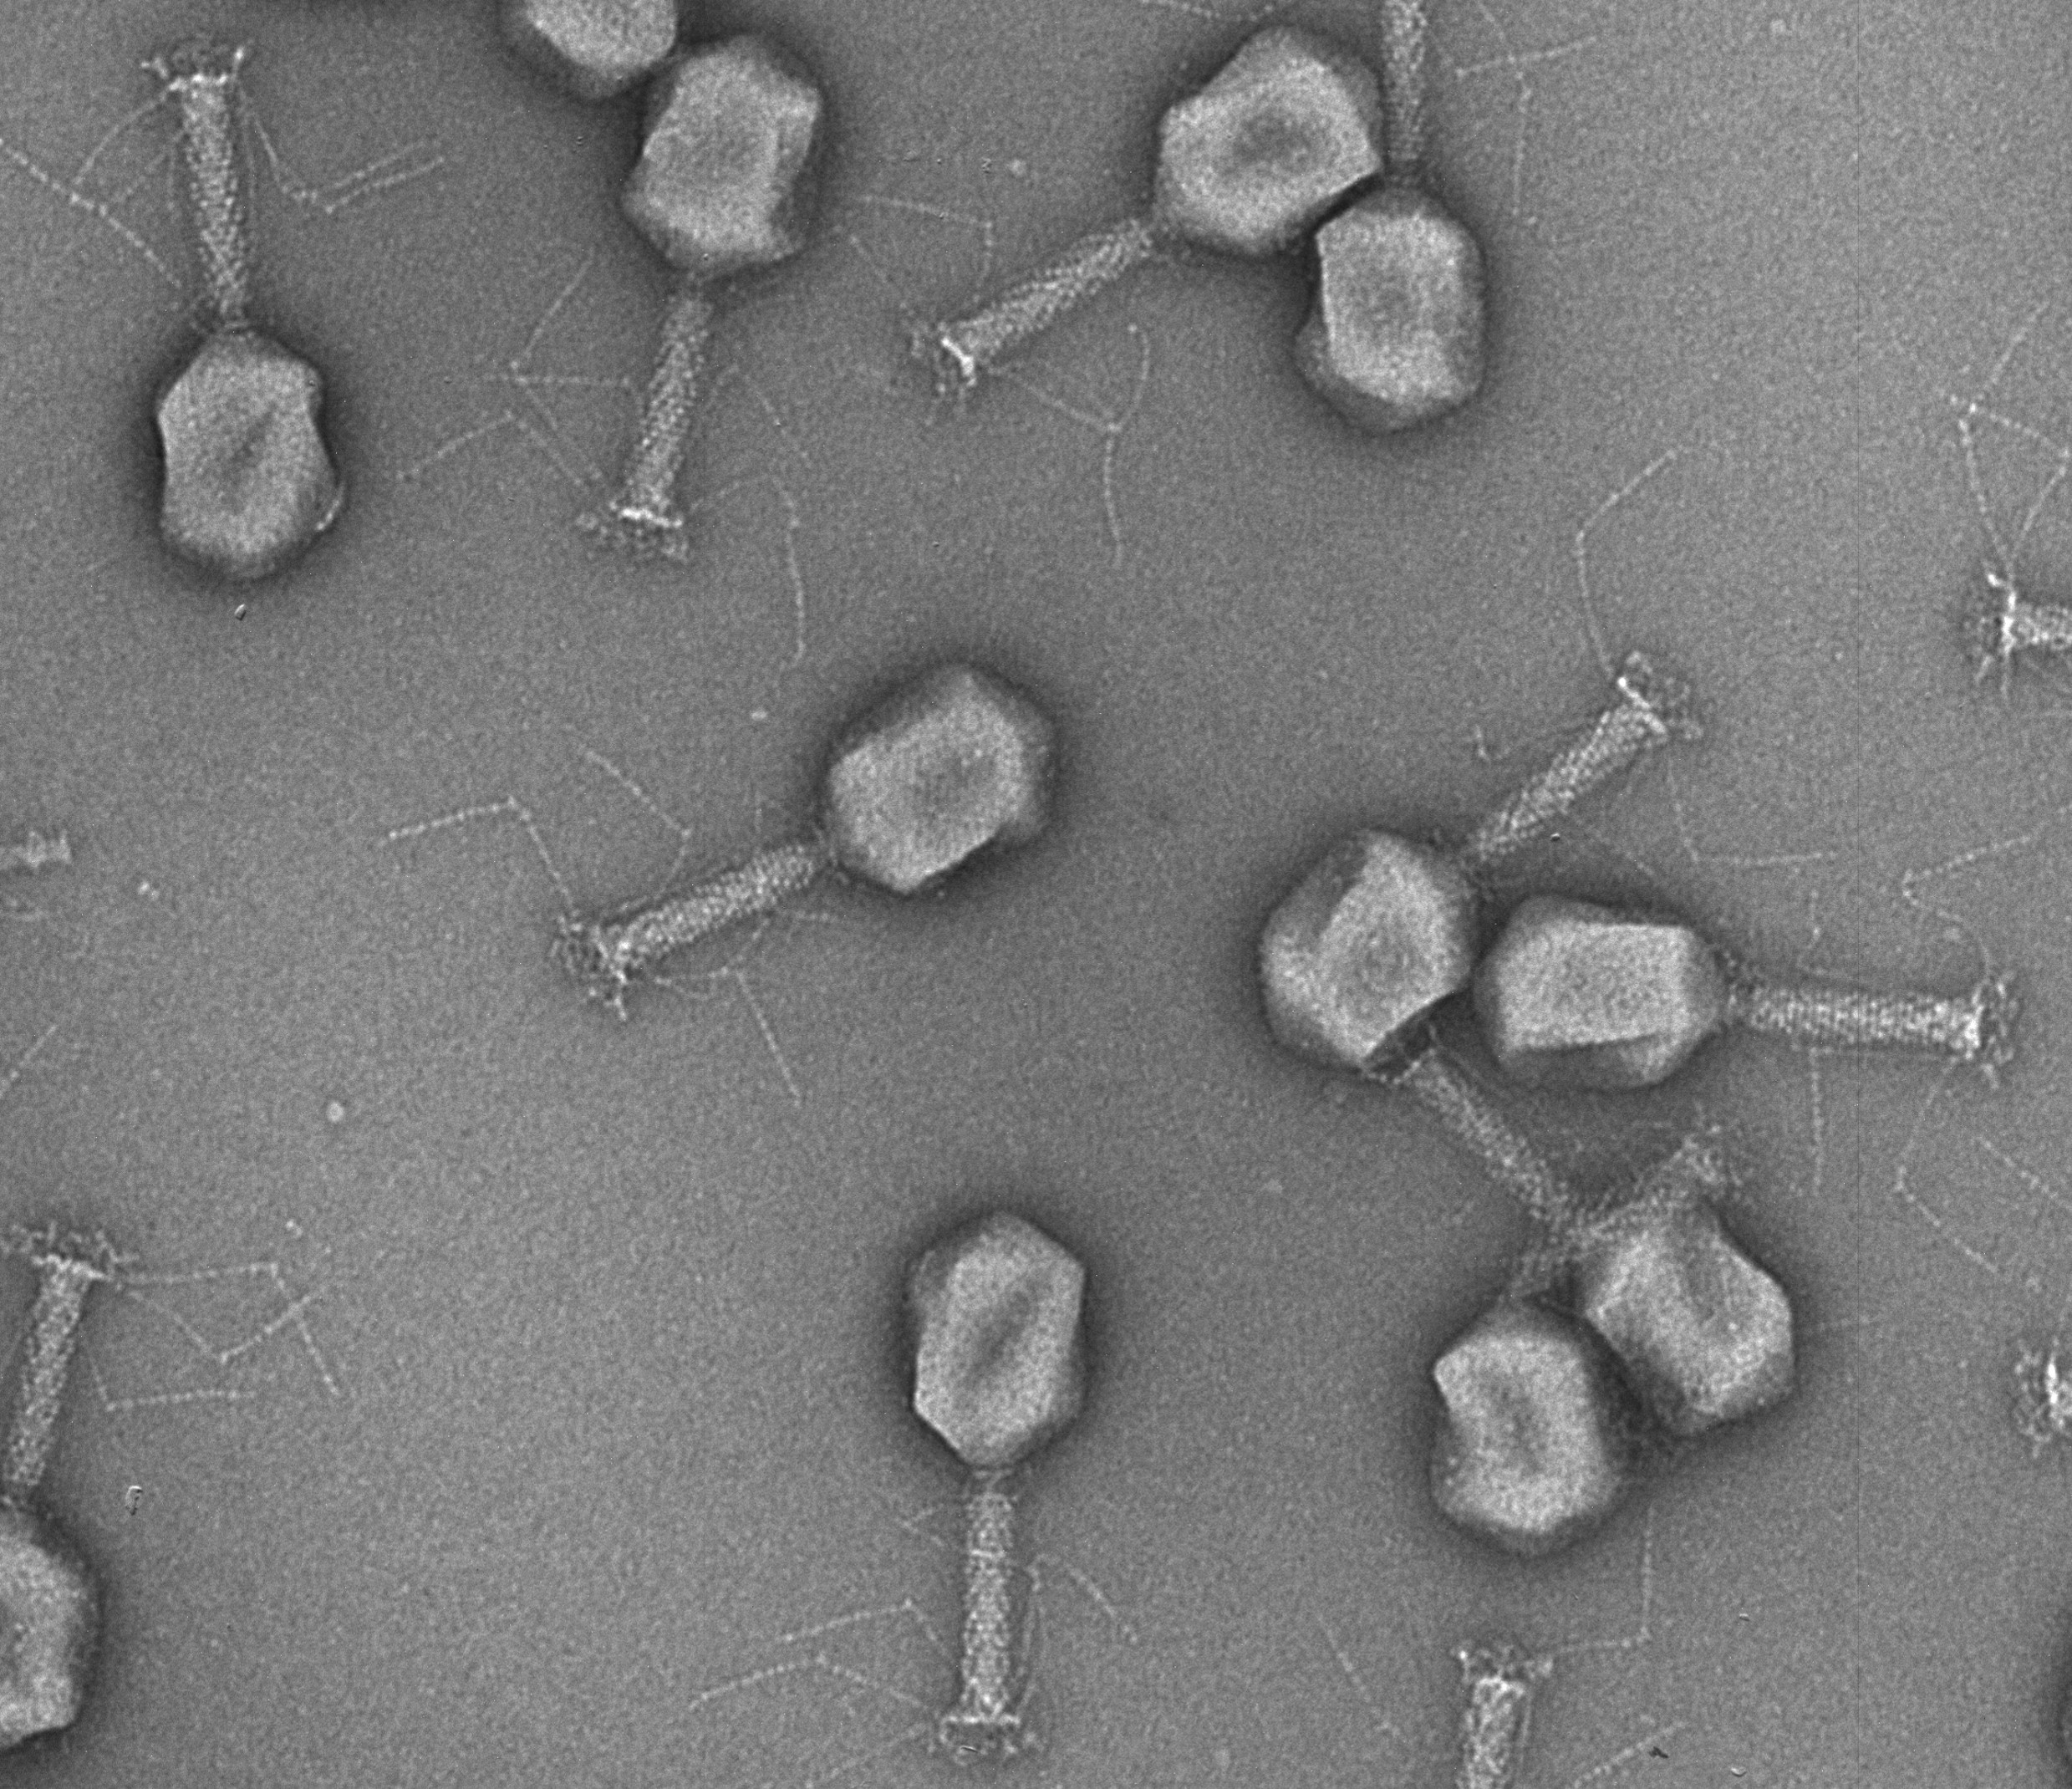 Electron micrograph of phages